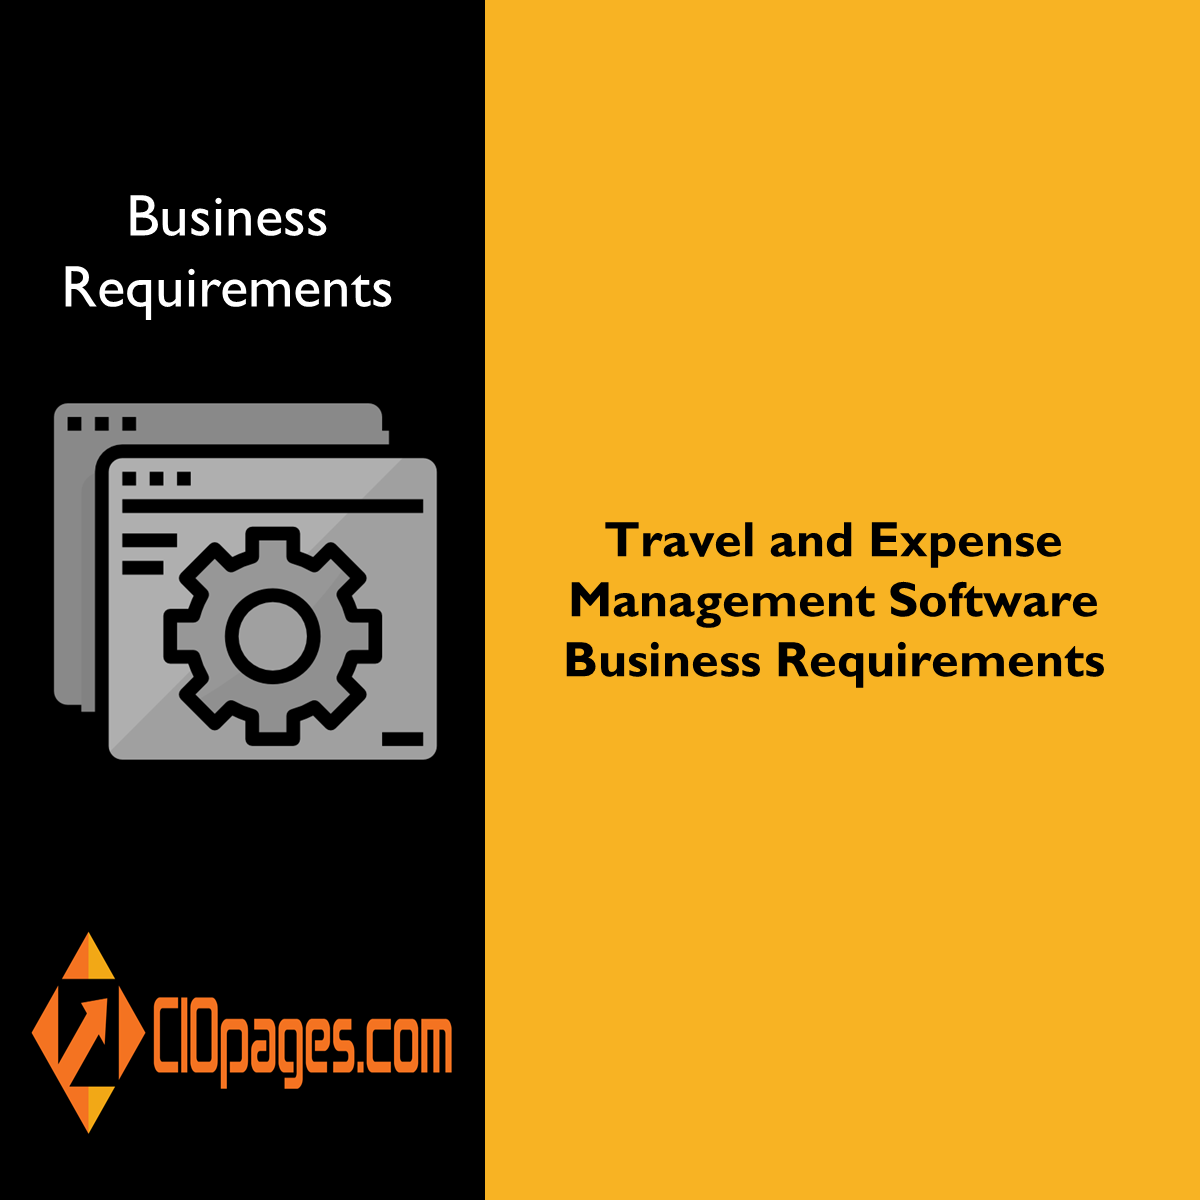 Travel and Expense Management Software Business Requirements